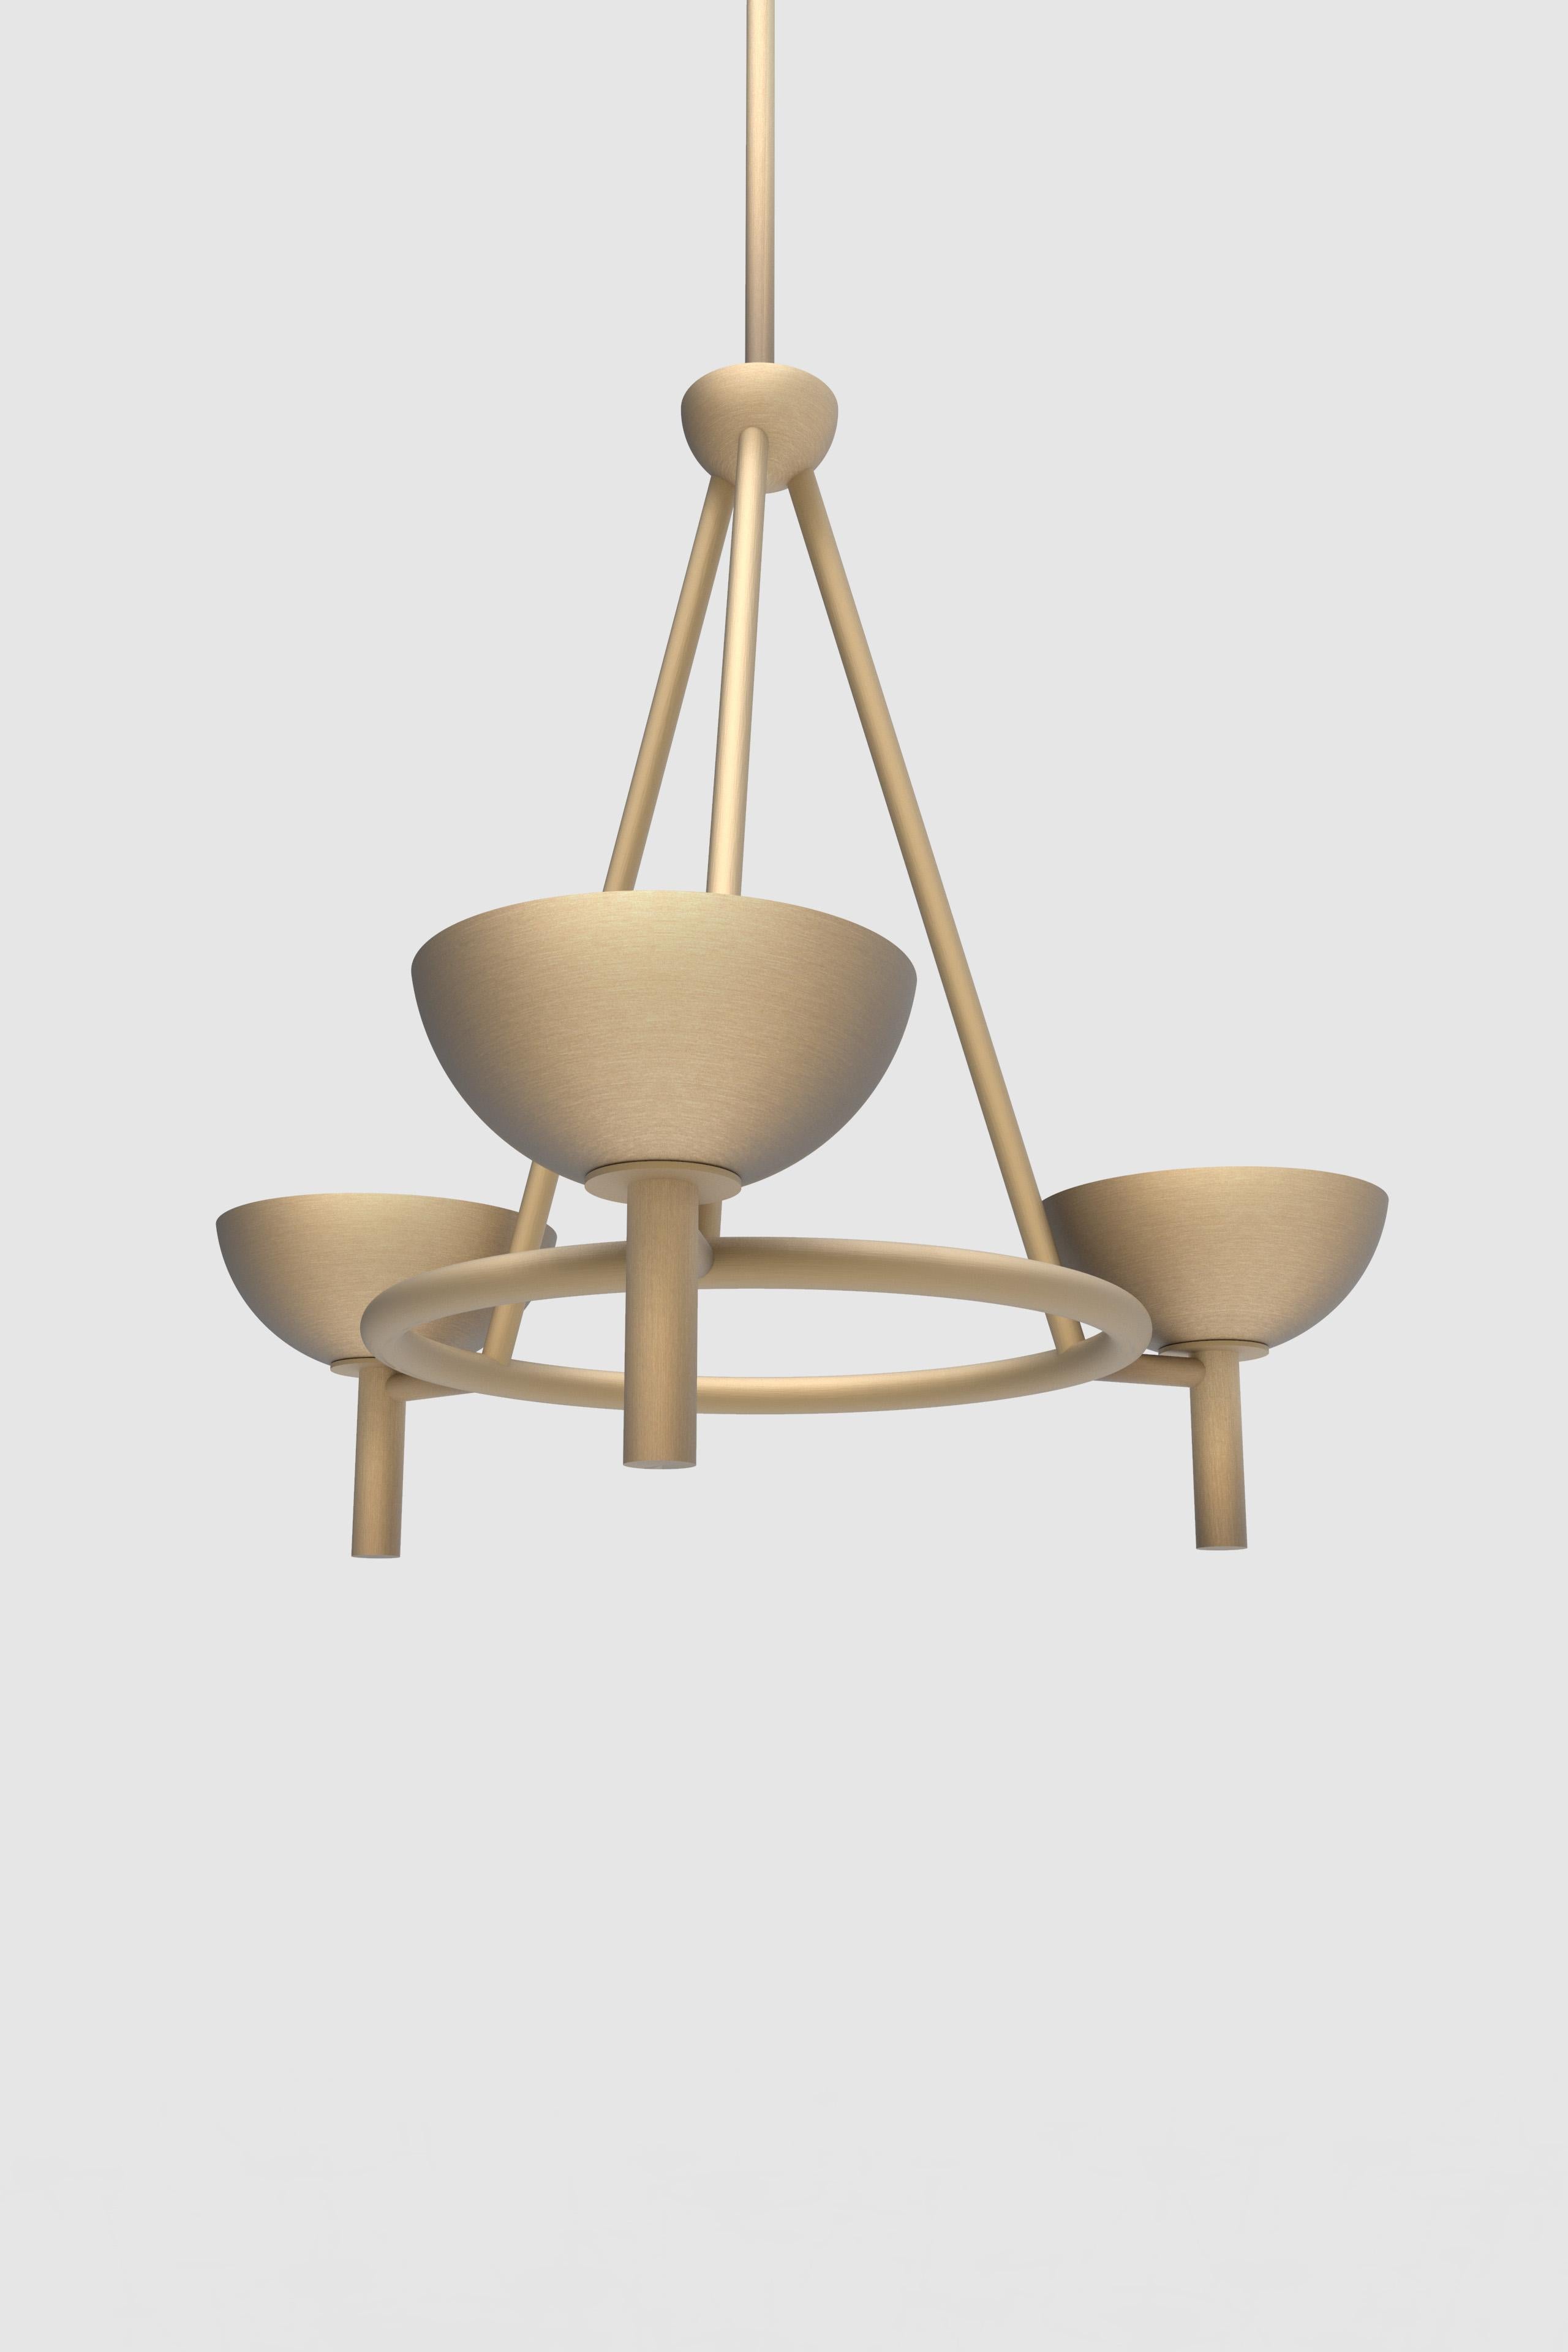 Orphan Work 200 Chandelier BB
Shown in brushed brass
Available in brushed brass and blackened brass
Measures: 34” diameter x 24” height
Height to order
UL approved
Holds (3) 60W candelabra bulb
LED bulb recommended
uplight with downlight by